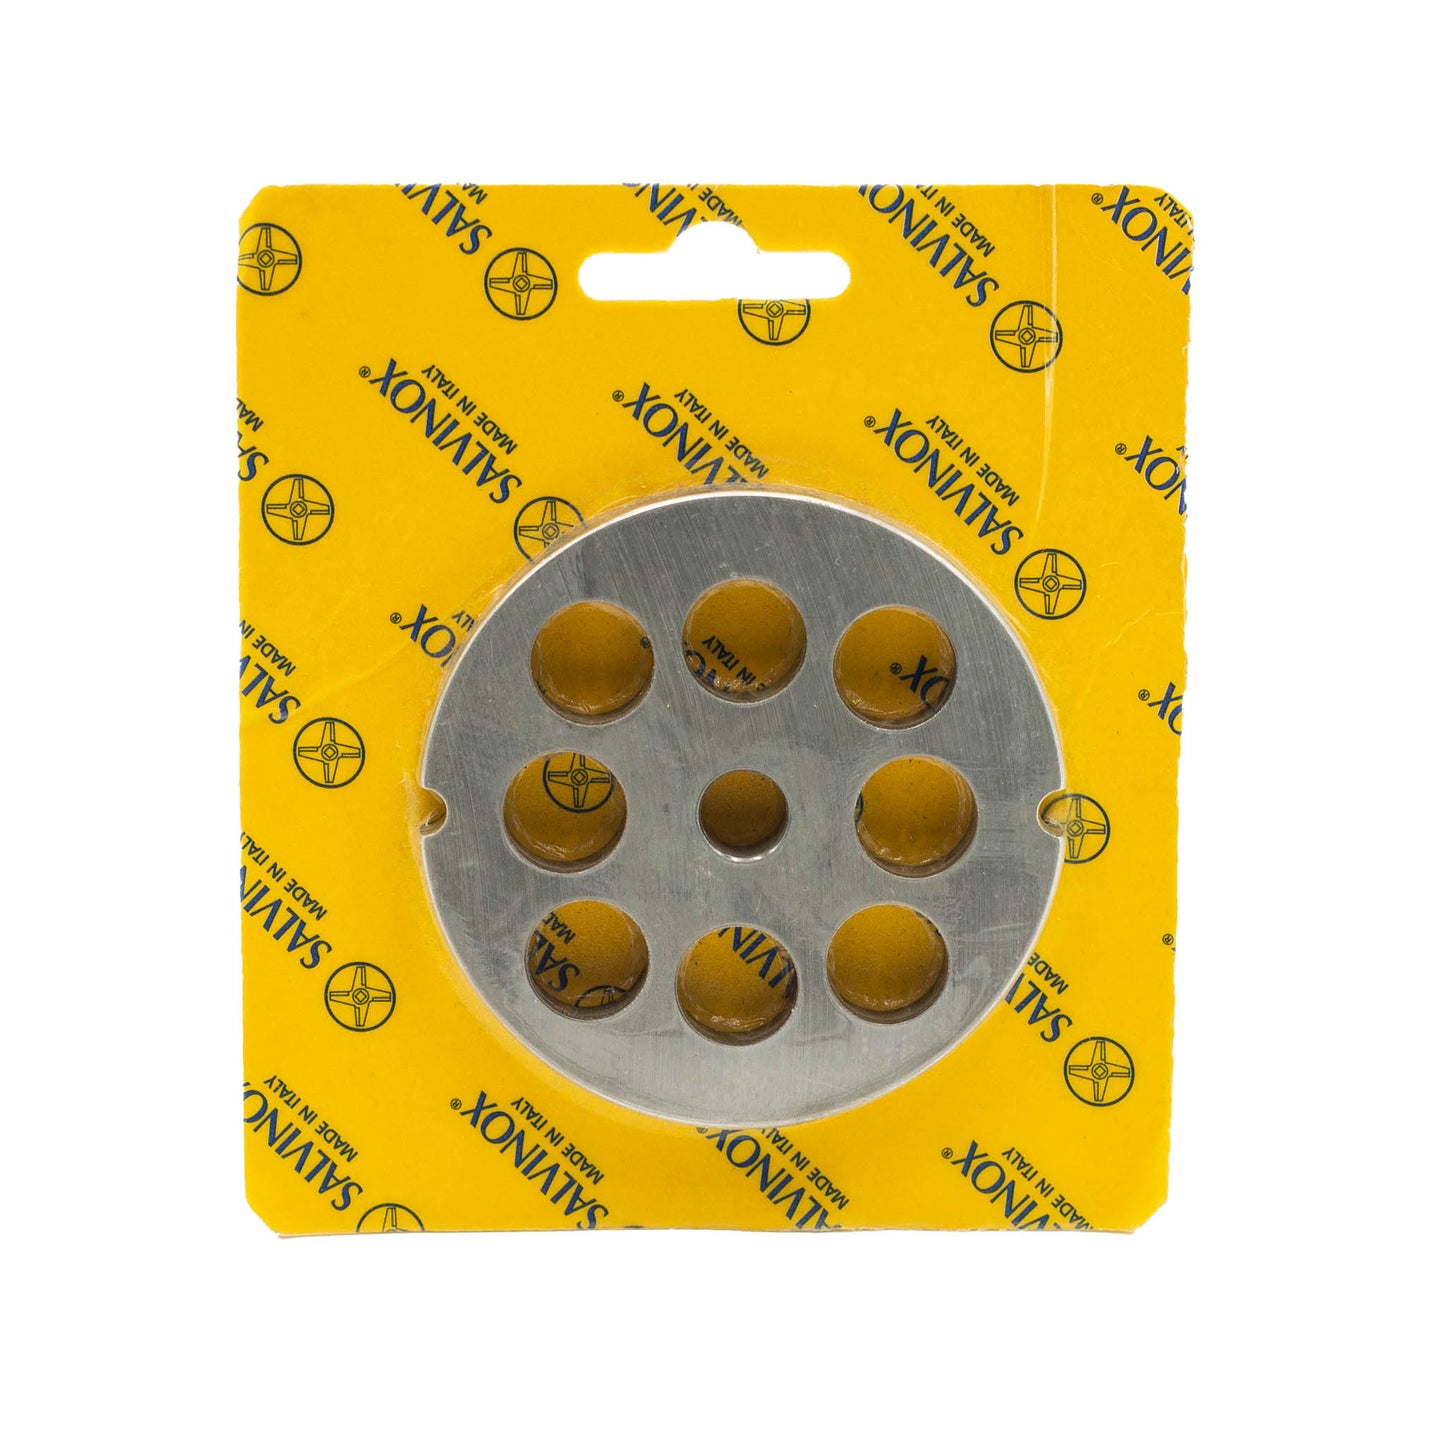 Size 22 with 16mm holes stainless steel replacement mincer plate for salami and sausage mincing machines. 